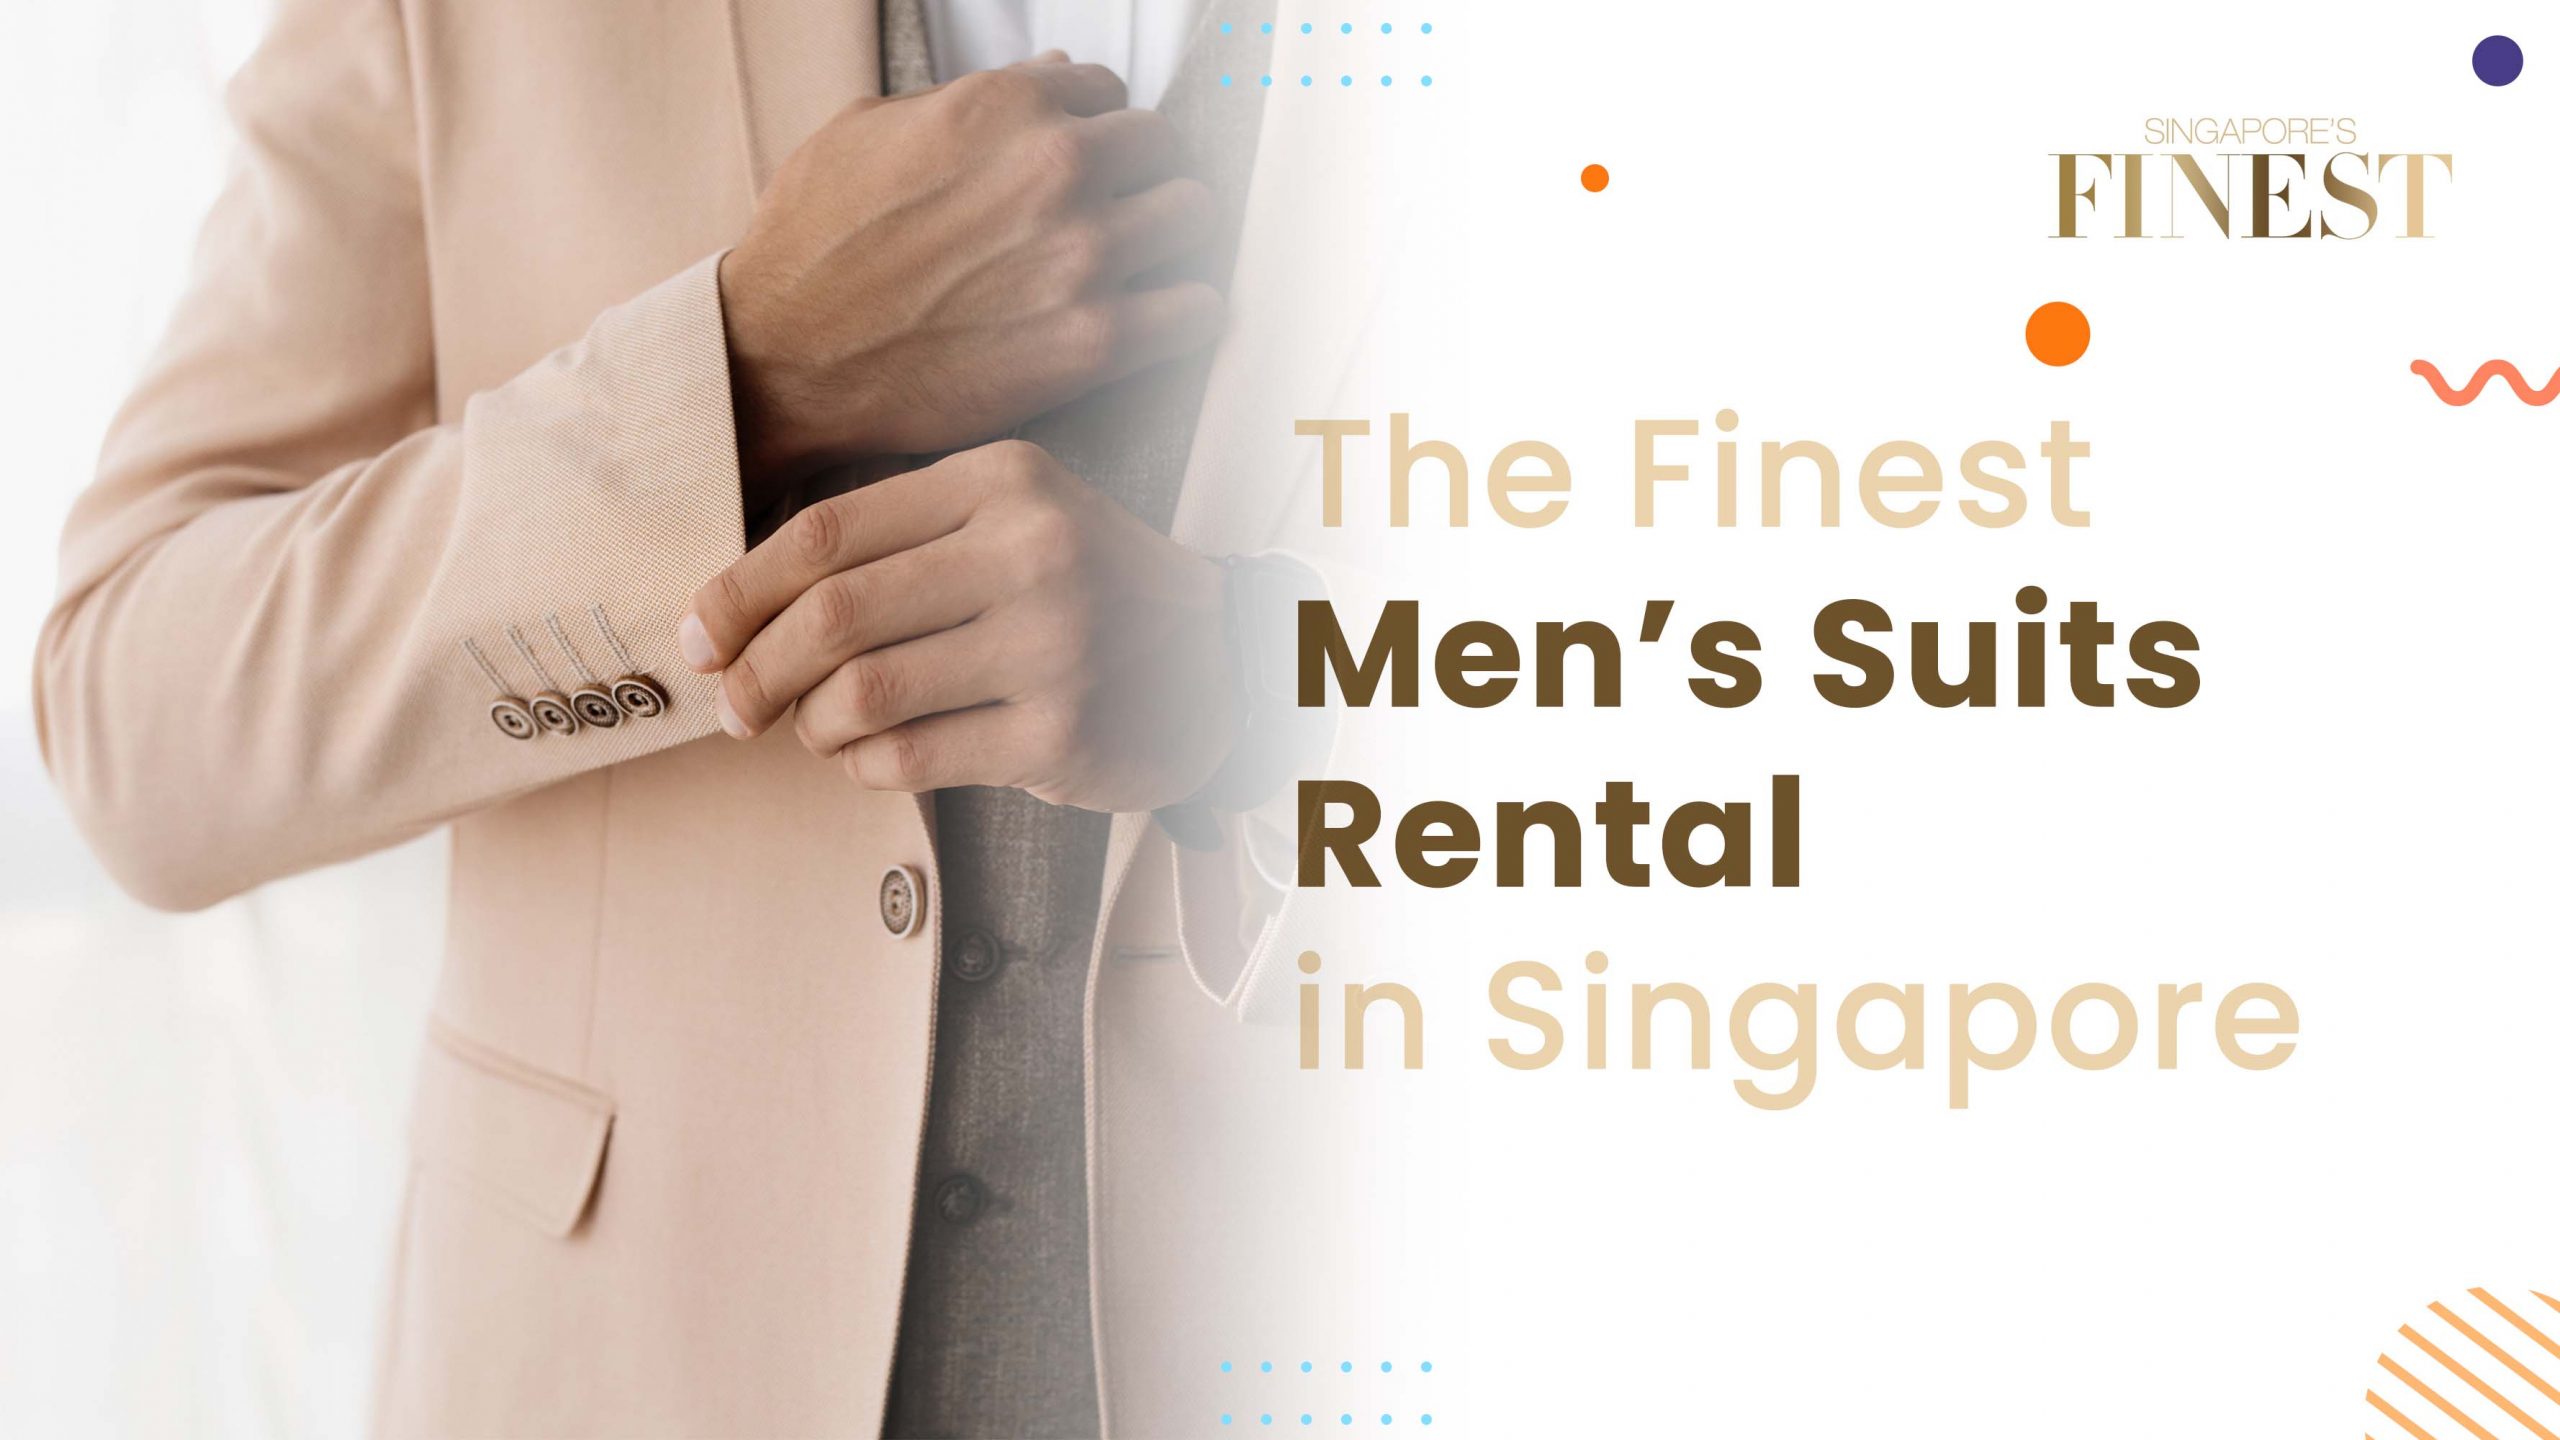 The Finest Men's Suits Rental in Singapore